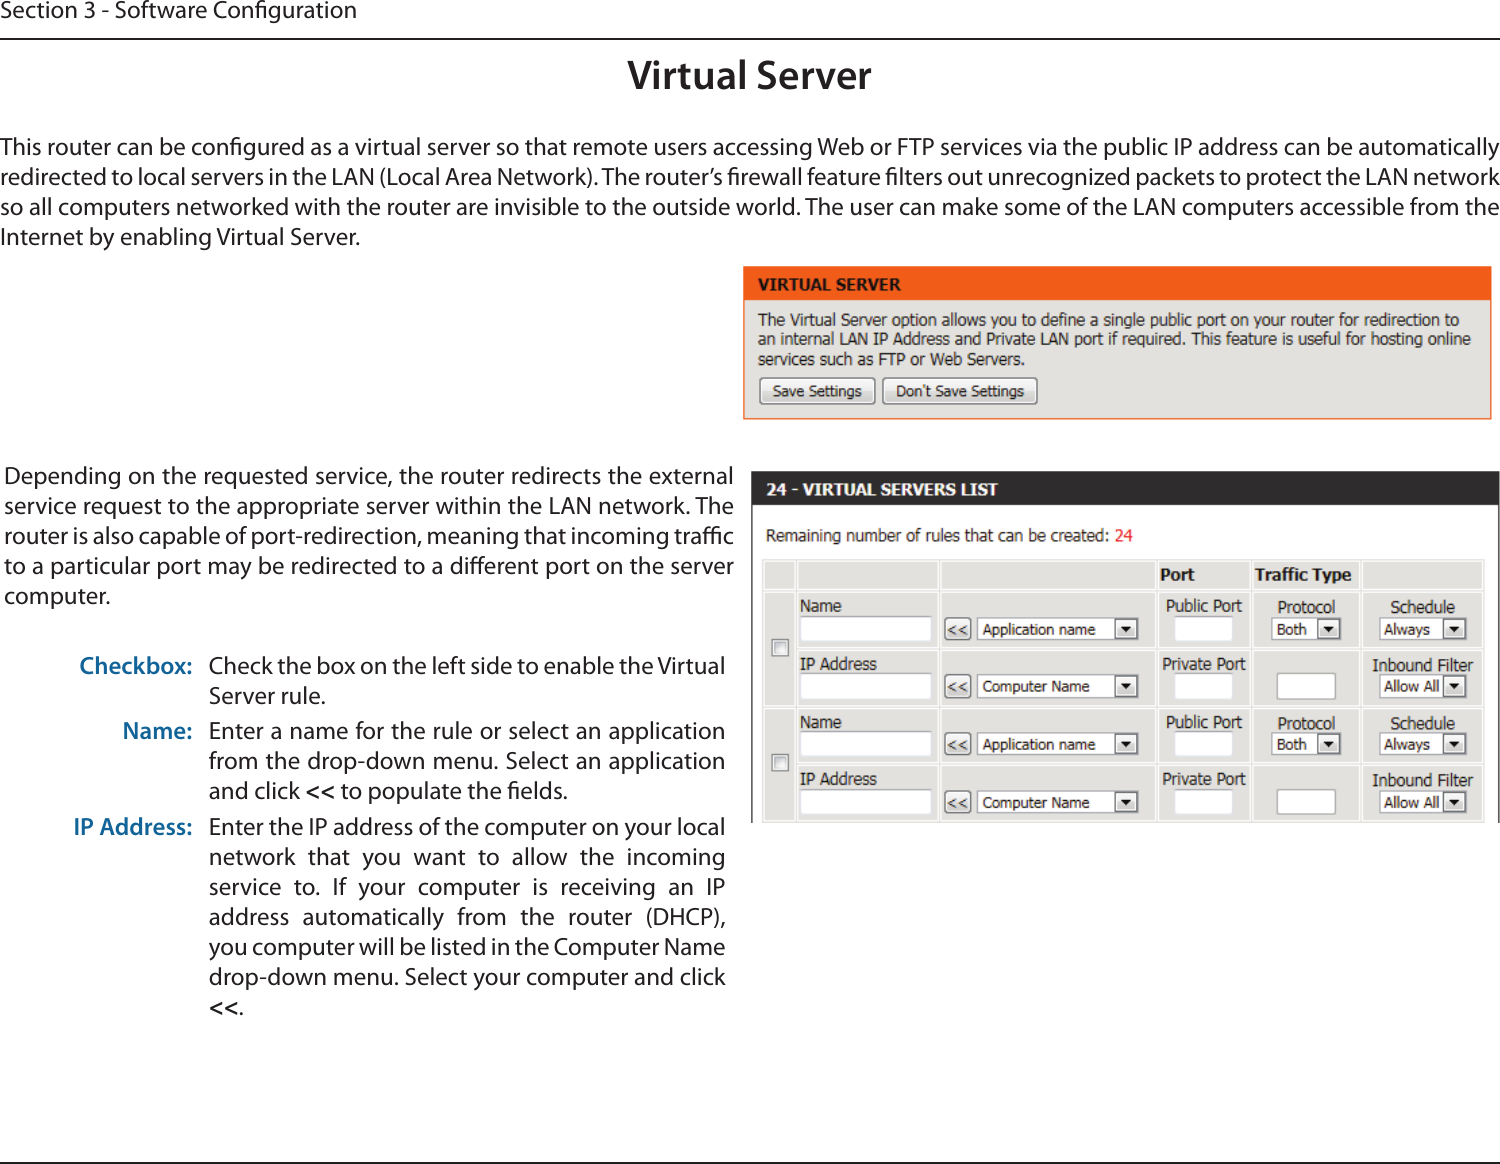 Section 3 - Software CongurationVirtual ServerThis router can be congured as a virtual server so that remote users accessing Web or FTP services via the public IP address can be automatically redirected to local servers in the LAN (Local Area Network). The router’s rewall feature lters out unrecognized packets to protect the LAN network so all computers networked with the router are invisible to the outside world. The user can make some of the LAN computers accessible from the Internet by enabling Virtual Server. Depending on the requested service, the router redirects the external service request to the appropriate server within the LAN network. The router is also capable of port-redirection, meaning that incoming trac to a particular port may be redirected to a dierent port on the server computer.Checkbox: Check the box on the left side to enable the Virtual Server rule.Name: Enter a name for the rule or select an application from the drop-down menu. Select an application and click &lt;&lt; to populate the elds.IP Address: Enter the IP address of the computer on your local network  that  you  want  to  allow  the  incoming service  to.  If  your  computer  is  receiving  an  IP address  automatically  from  the  router  (DHCP), you computer will be listed in the Computer Name drop-down menu. Select your computer and click &lt;&lt;.